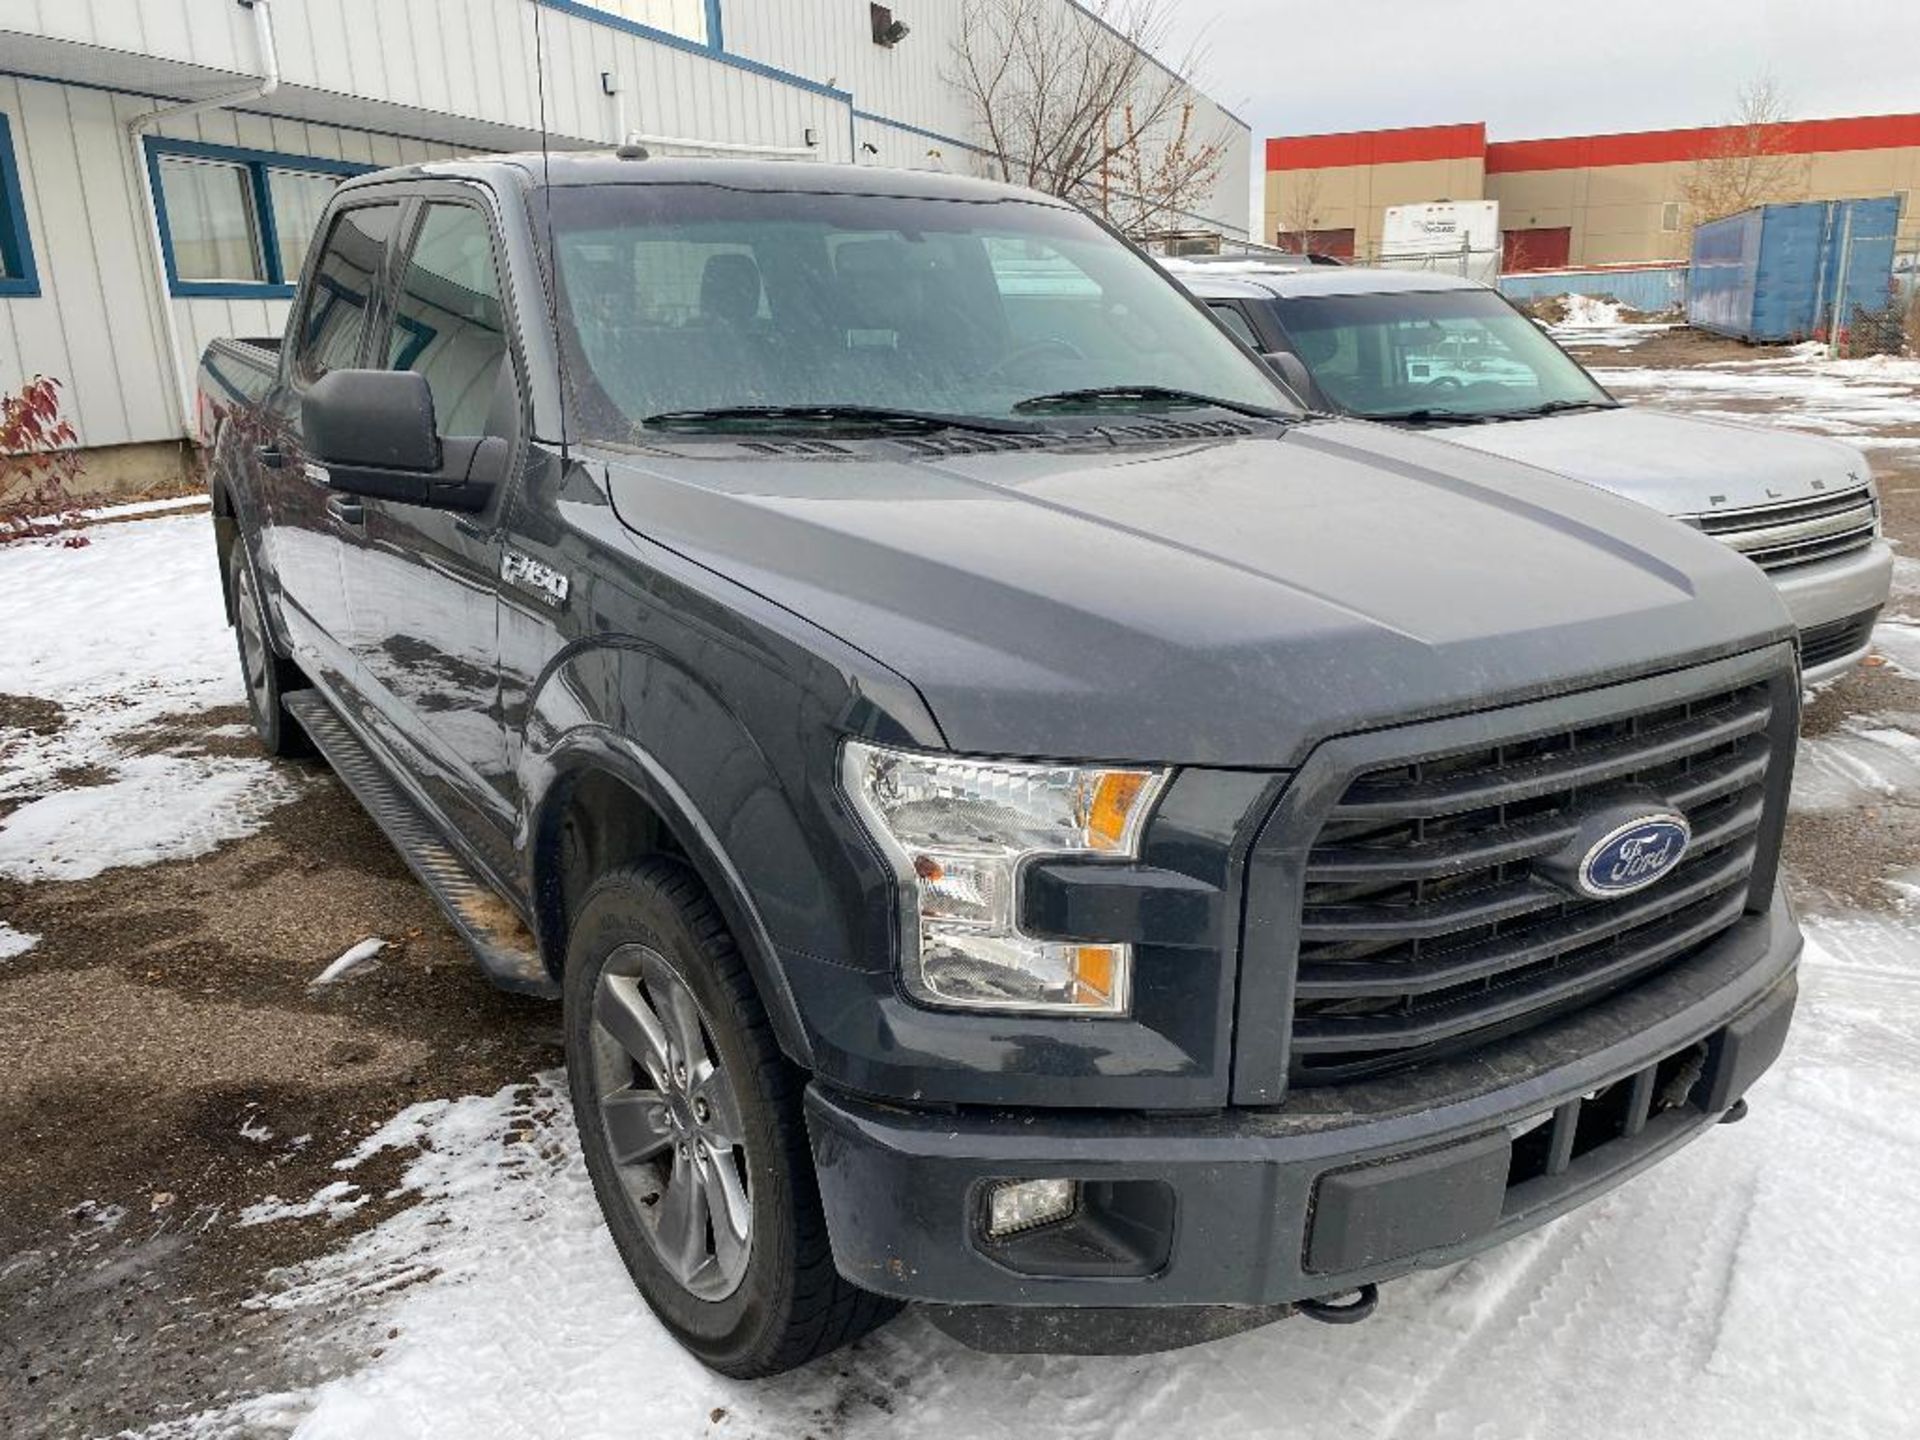 2016 Ford F-150 SuperCrew FX4 4X4, VIN#: 1FTEW1EF4GFB05400 - Image 2 of 12